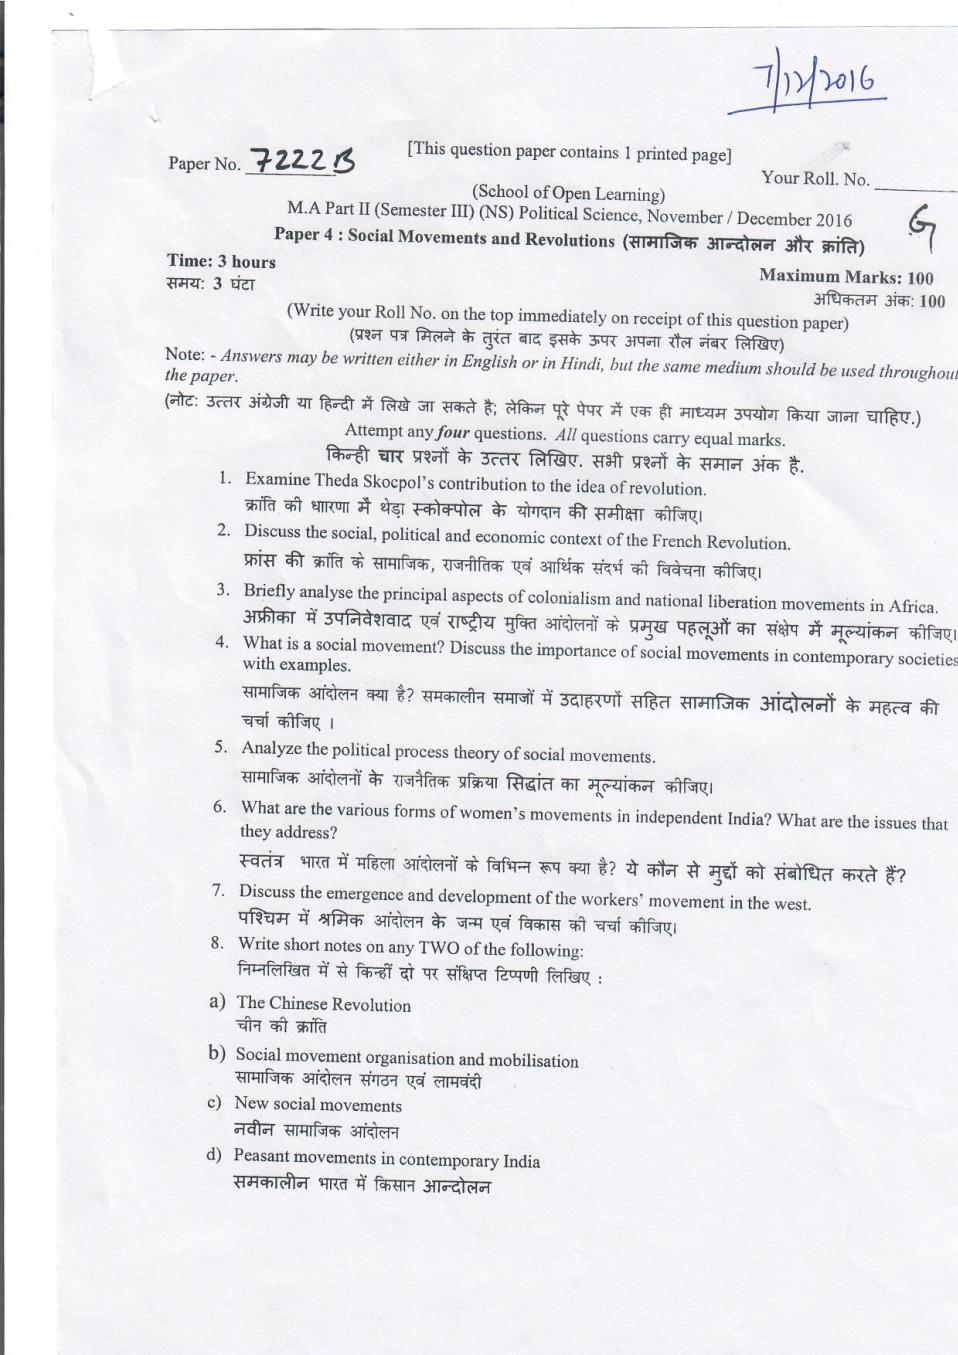 DU SOL M.A Political Science Question Paper 2nd Year 2017 Sem 3 Social Movements And Revolutions G - Page 1